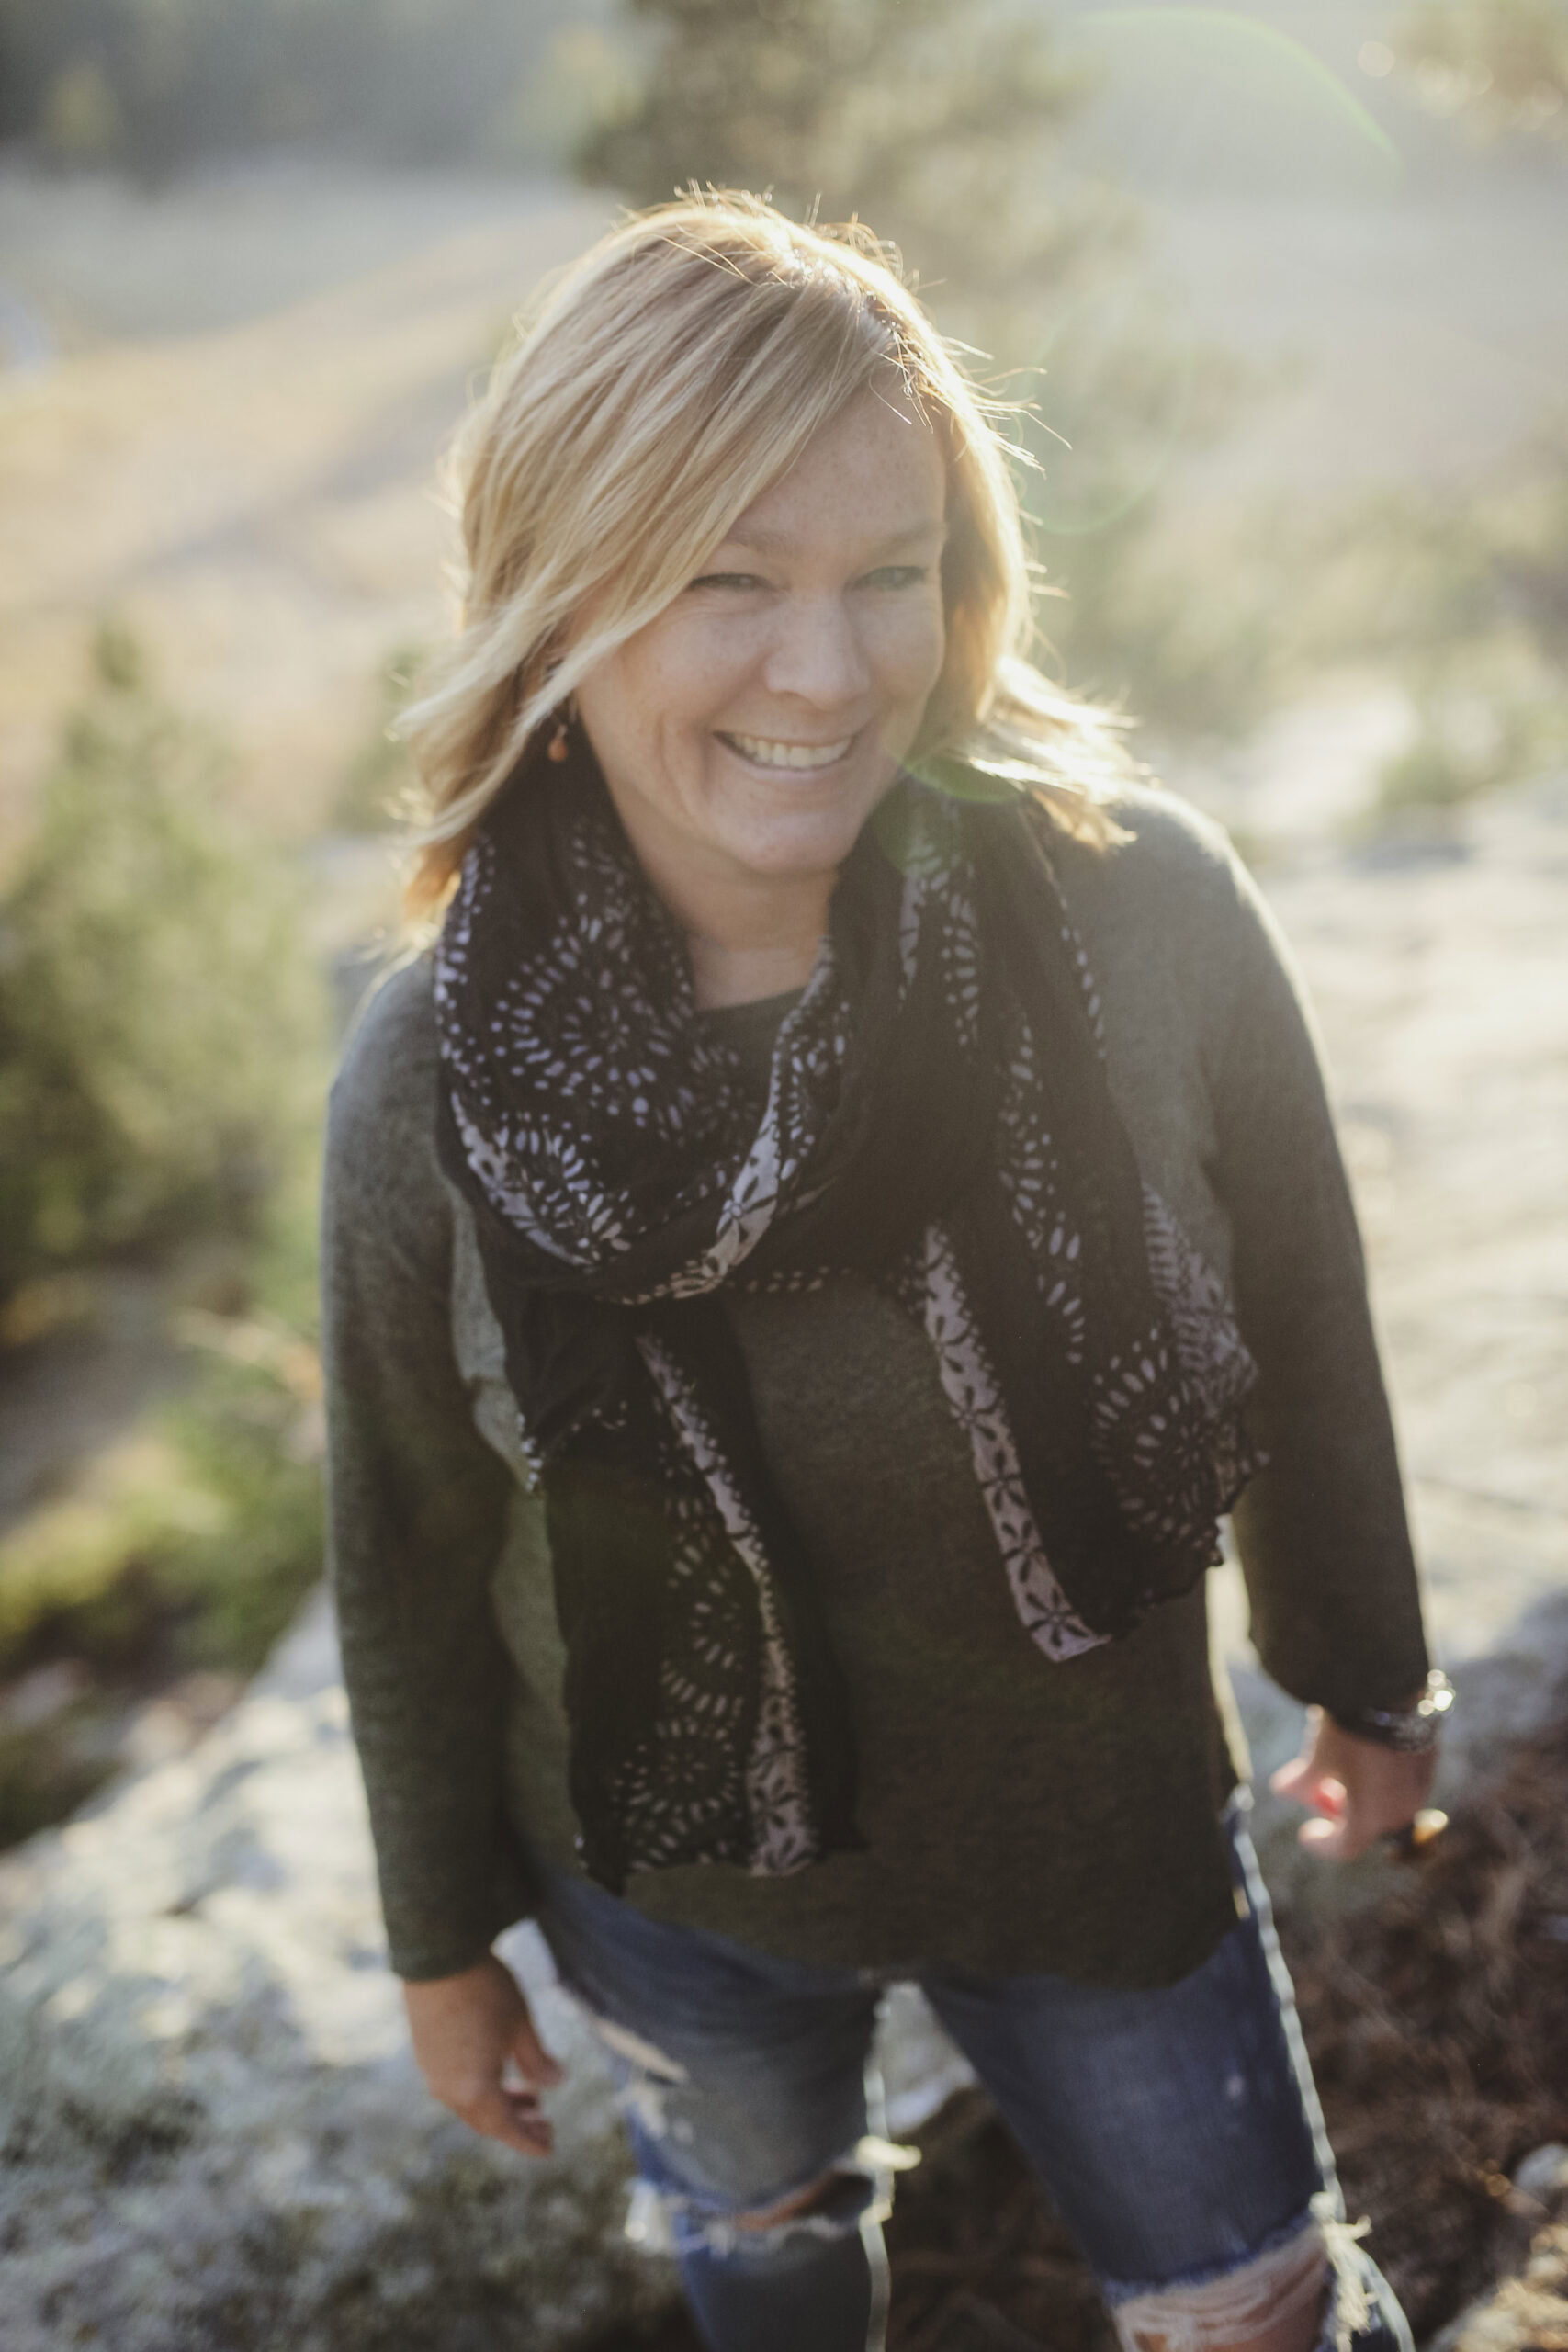 A Wendy Wright smiling outdoors, wearing a scarf, ripped jeans, and a sweater, with sunlight and a financial therapy book in her hand against the background of a natural landscape.